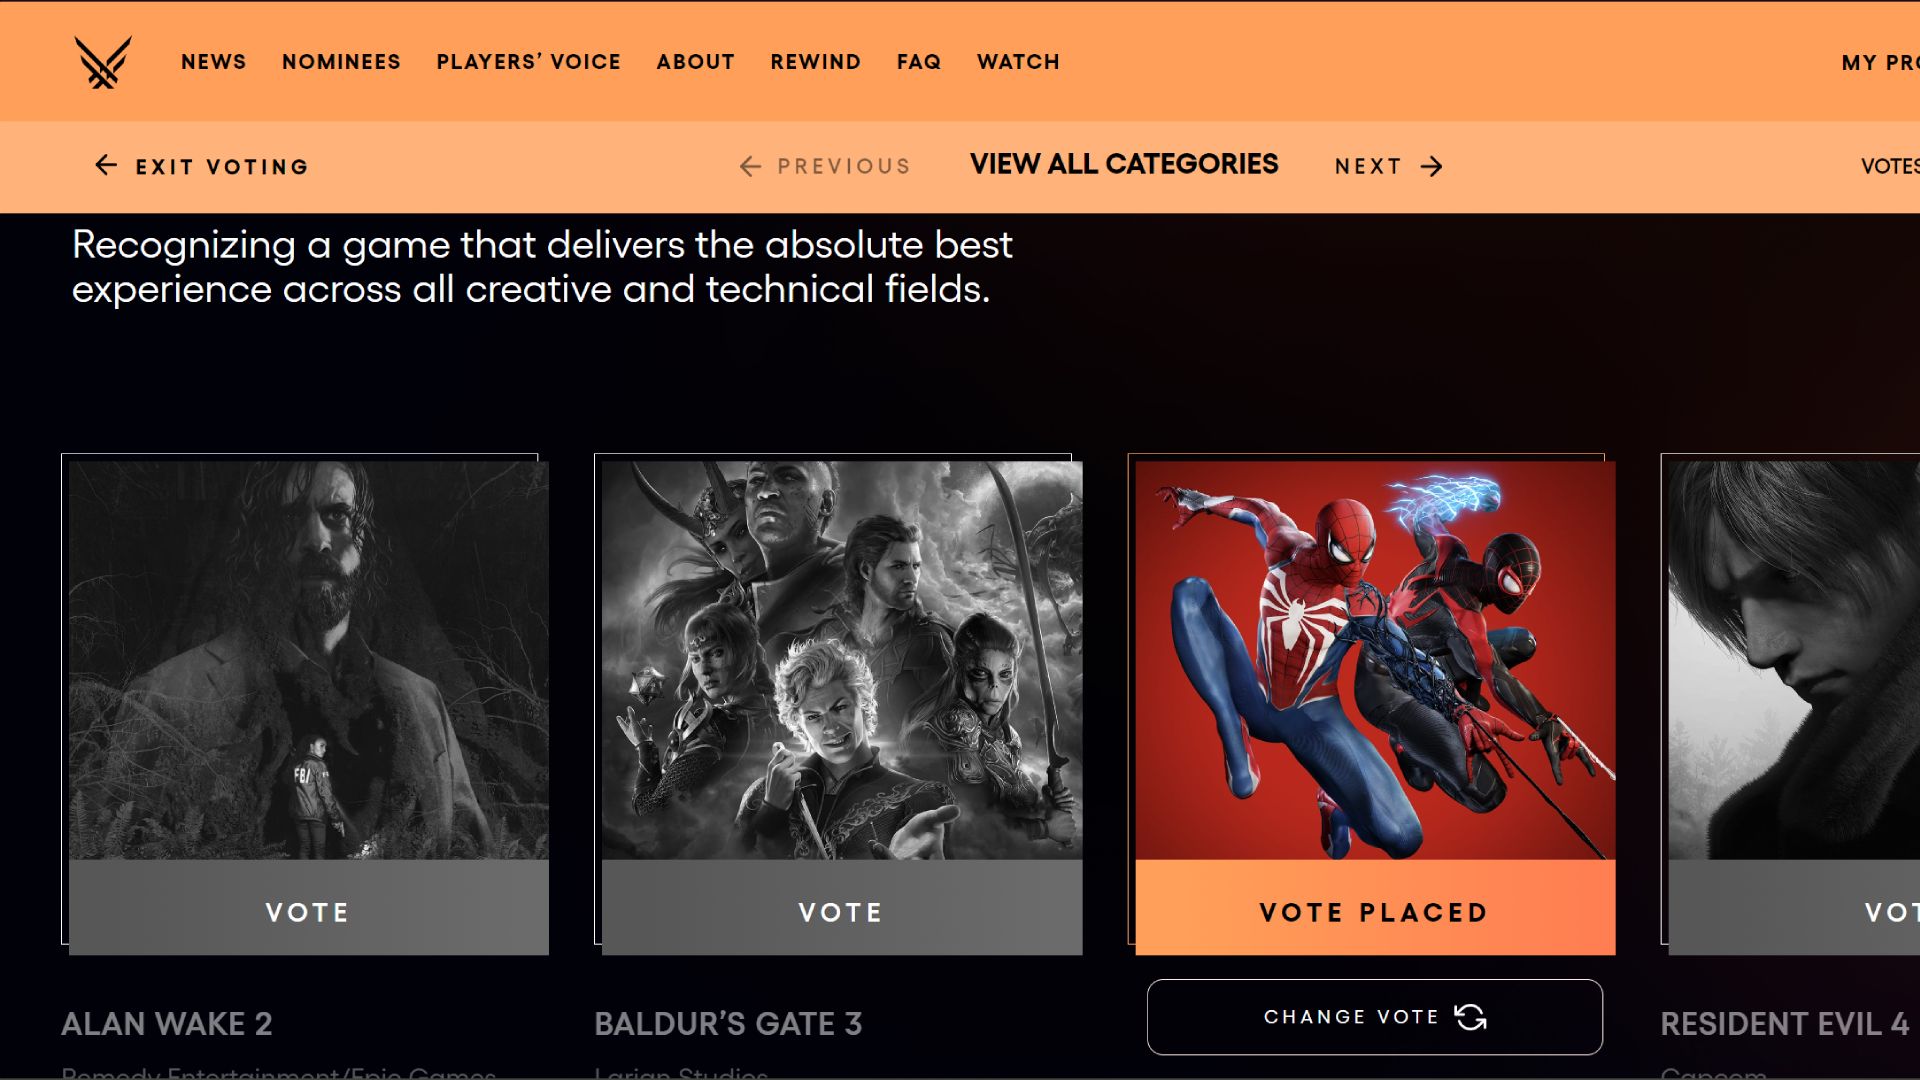 The voting page on The Game Awards website